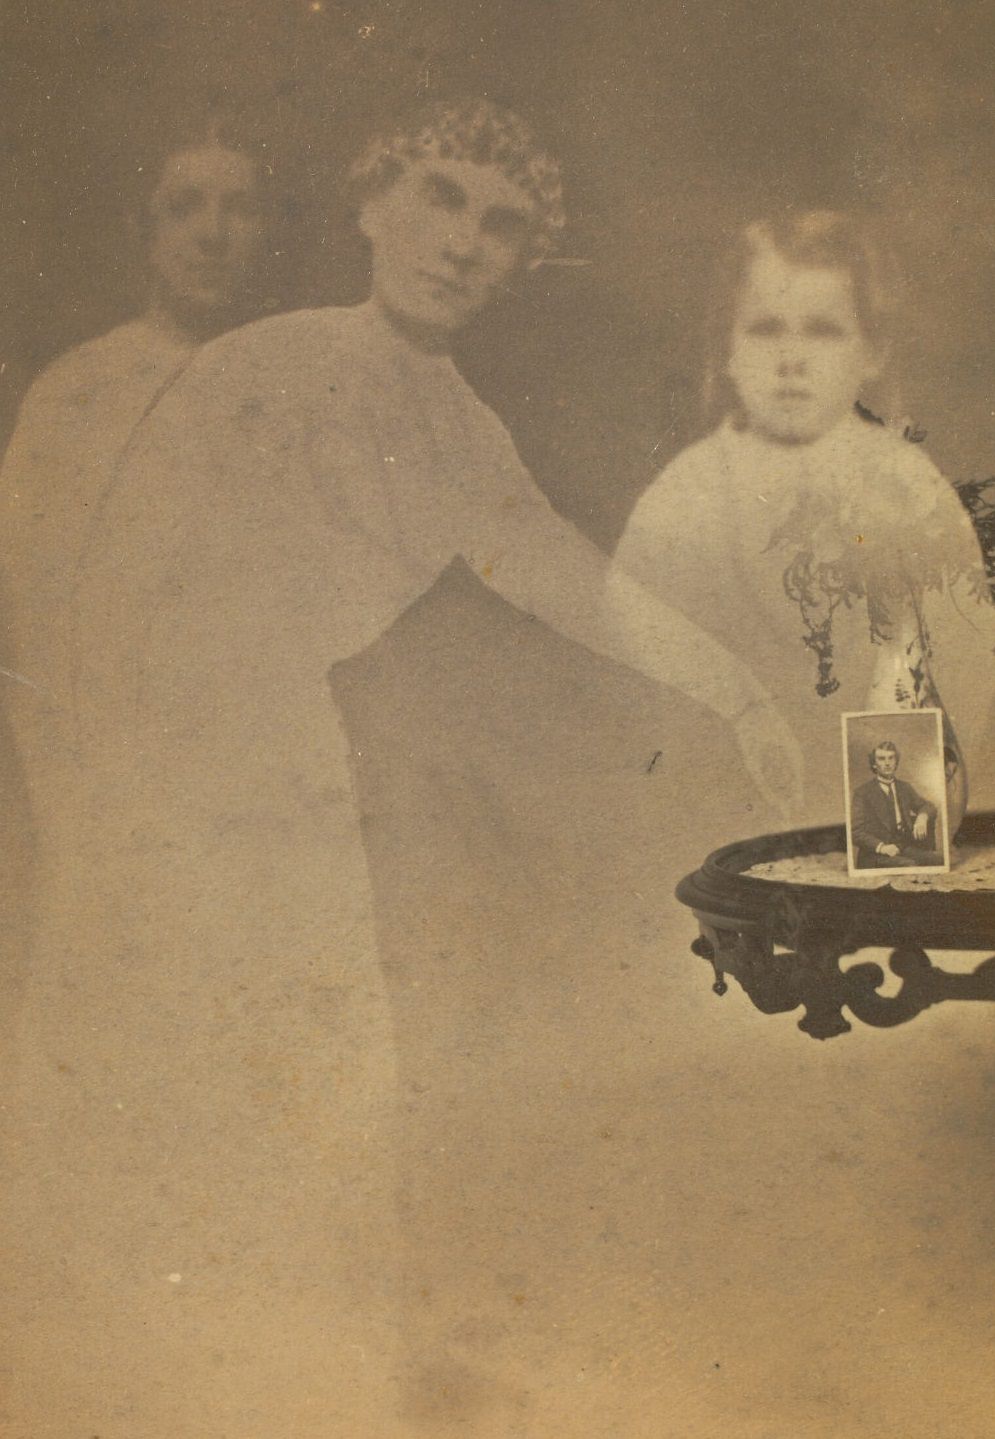 A small photograph propped against a vase of flowers on a side table. Faint images of a woman and two children are visible next to the table.